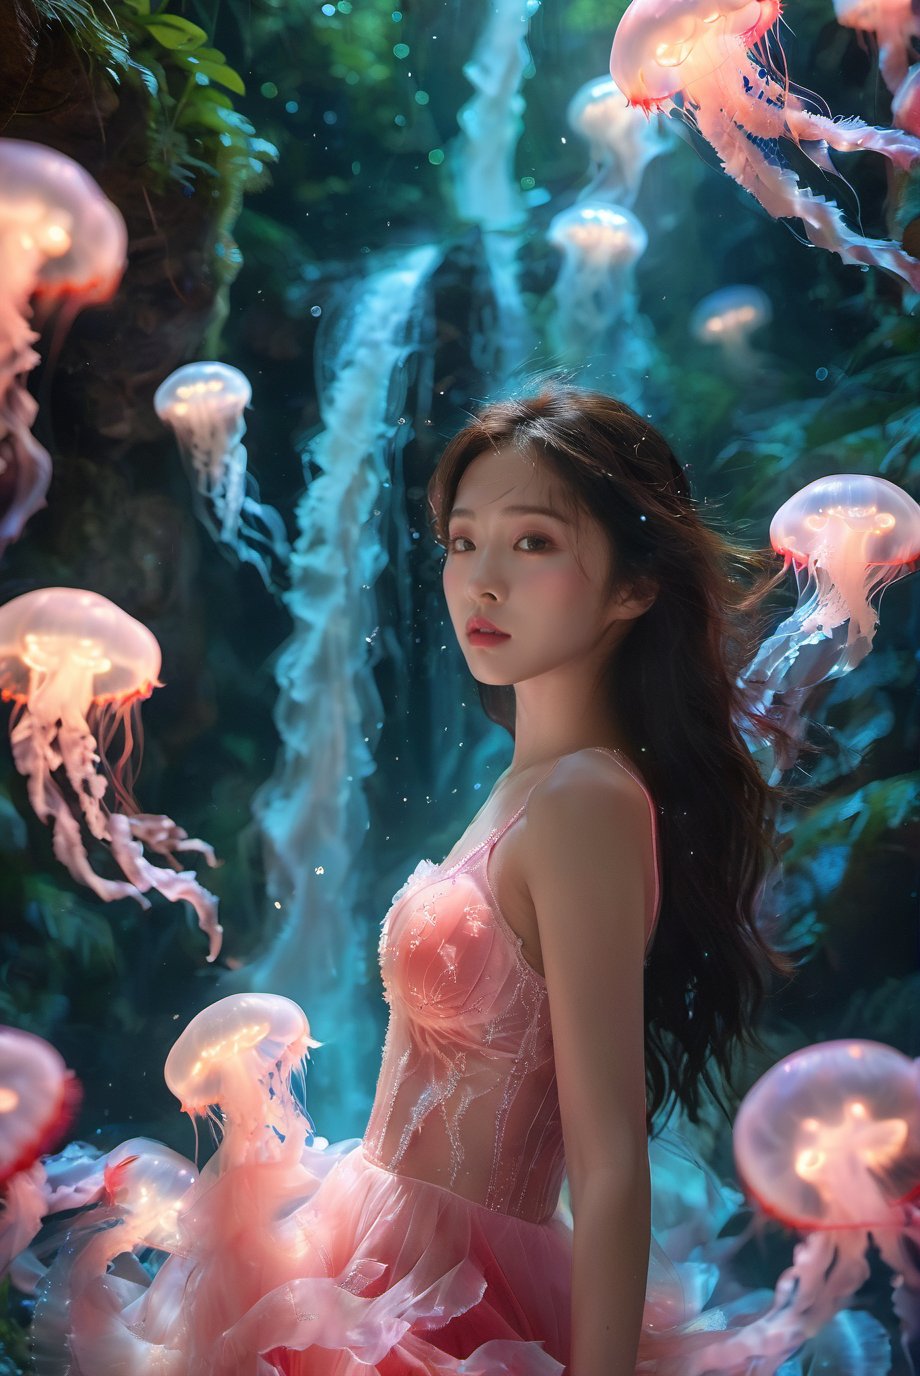 An Asian young woman with long flowing hair, adorned in a delicate emerald red lingerie, surrounded by a mesmerizing rainforest waterfall environment. She stands amidst a dance of luminescent jellyfish, which glow in hues of pink and blue. The backdrop is a cascading waterfall, punctuated by the soft glow of bioluminescent plants and the gentle mist of water. The woman's gaze is distant, as if lost in thought, while the jellyfish float gracefully around her, creating an ethereal and dreamlike atmosphere.